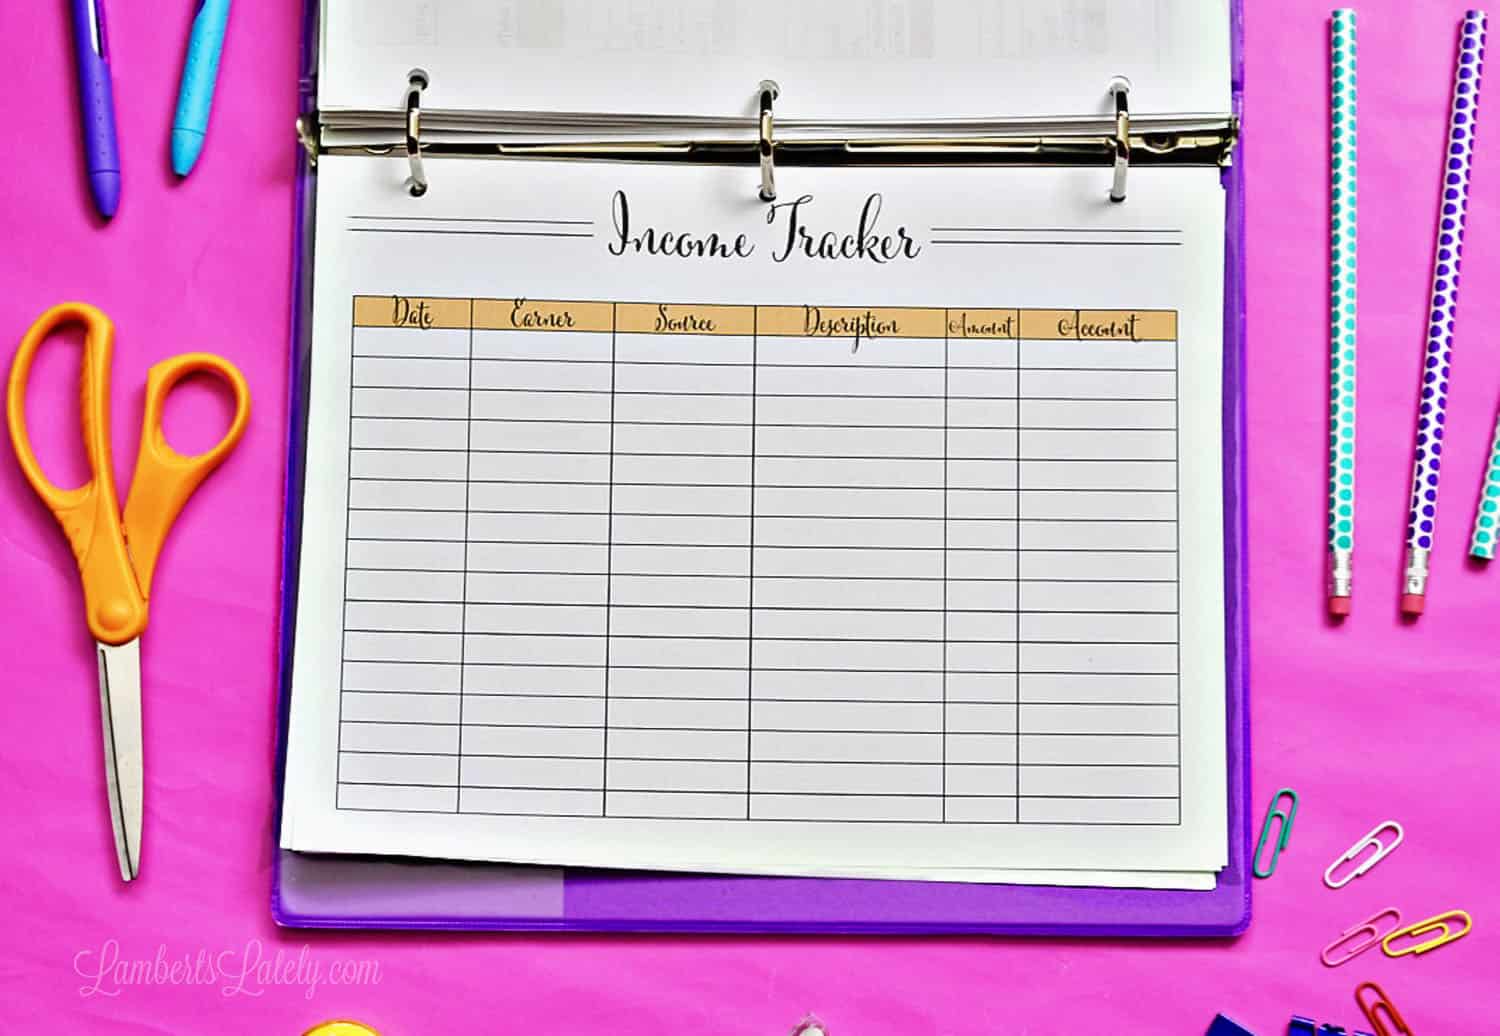 income tracker in a binder.